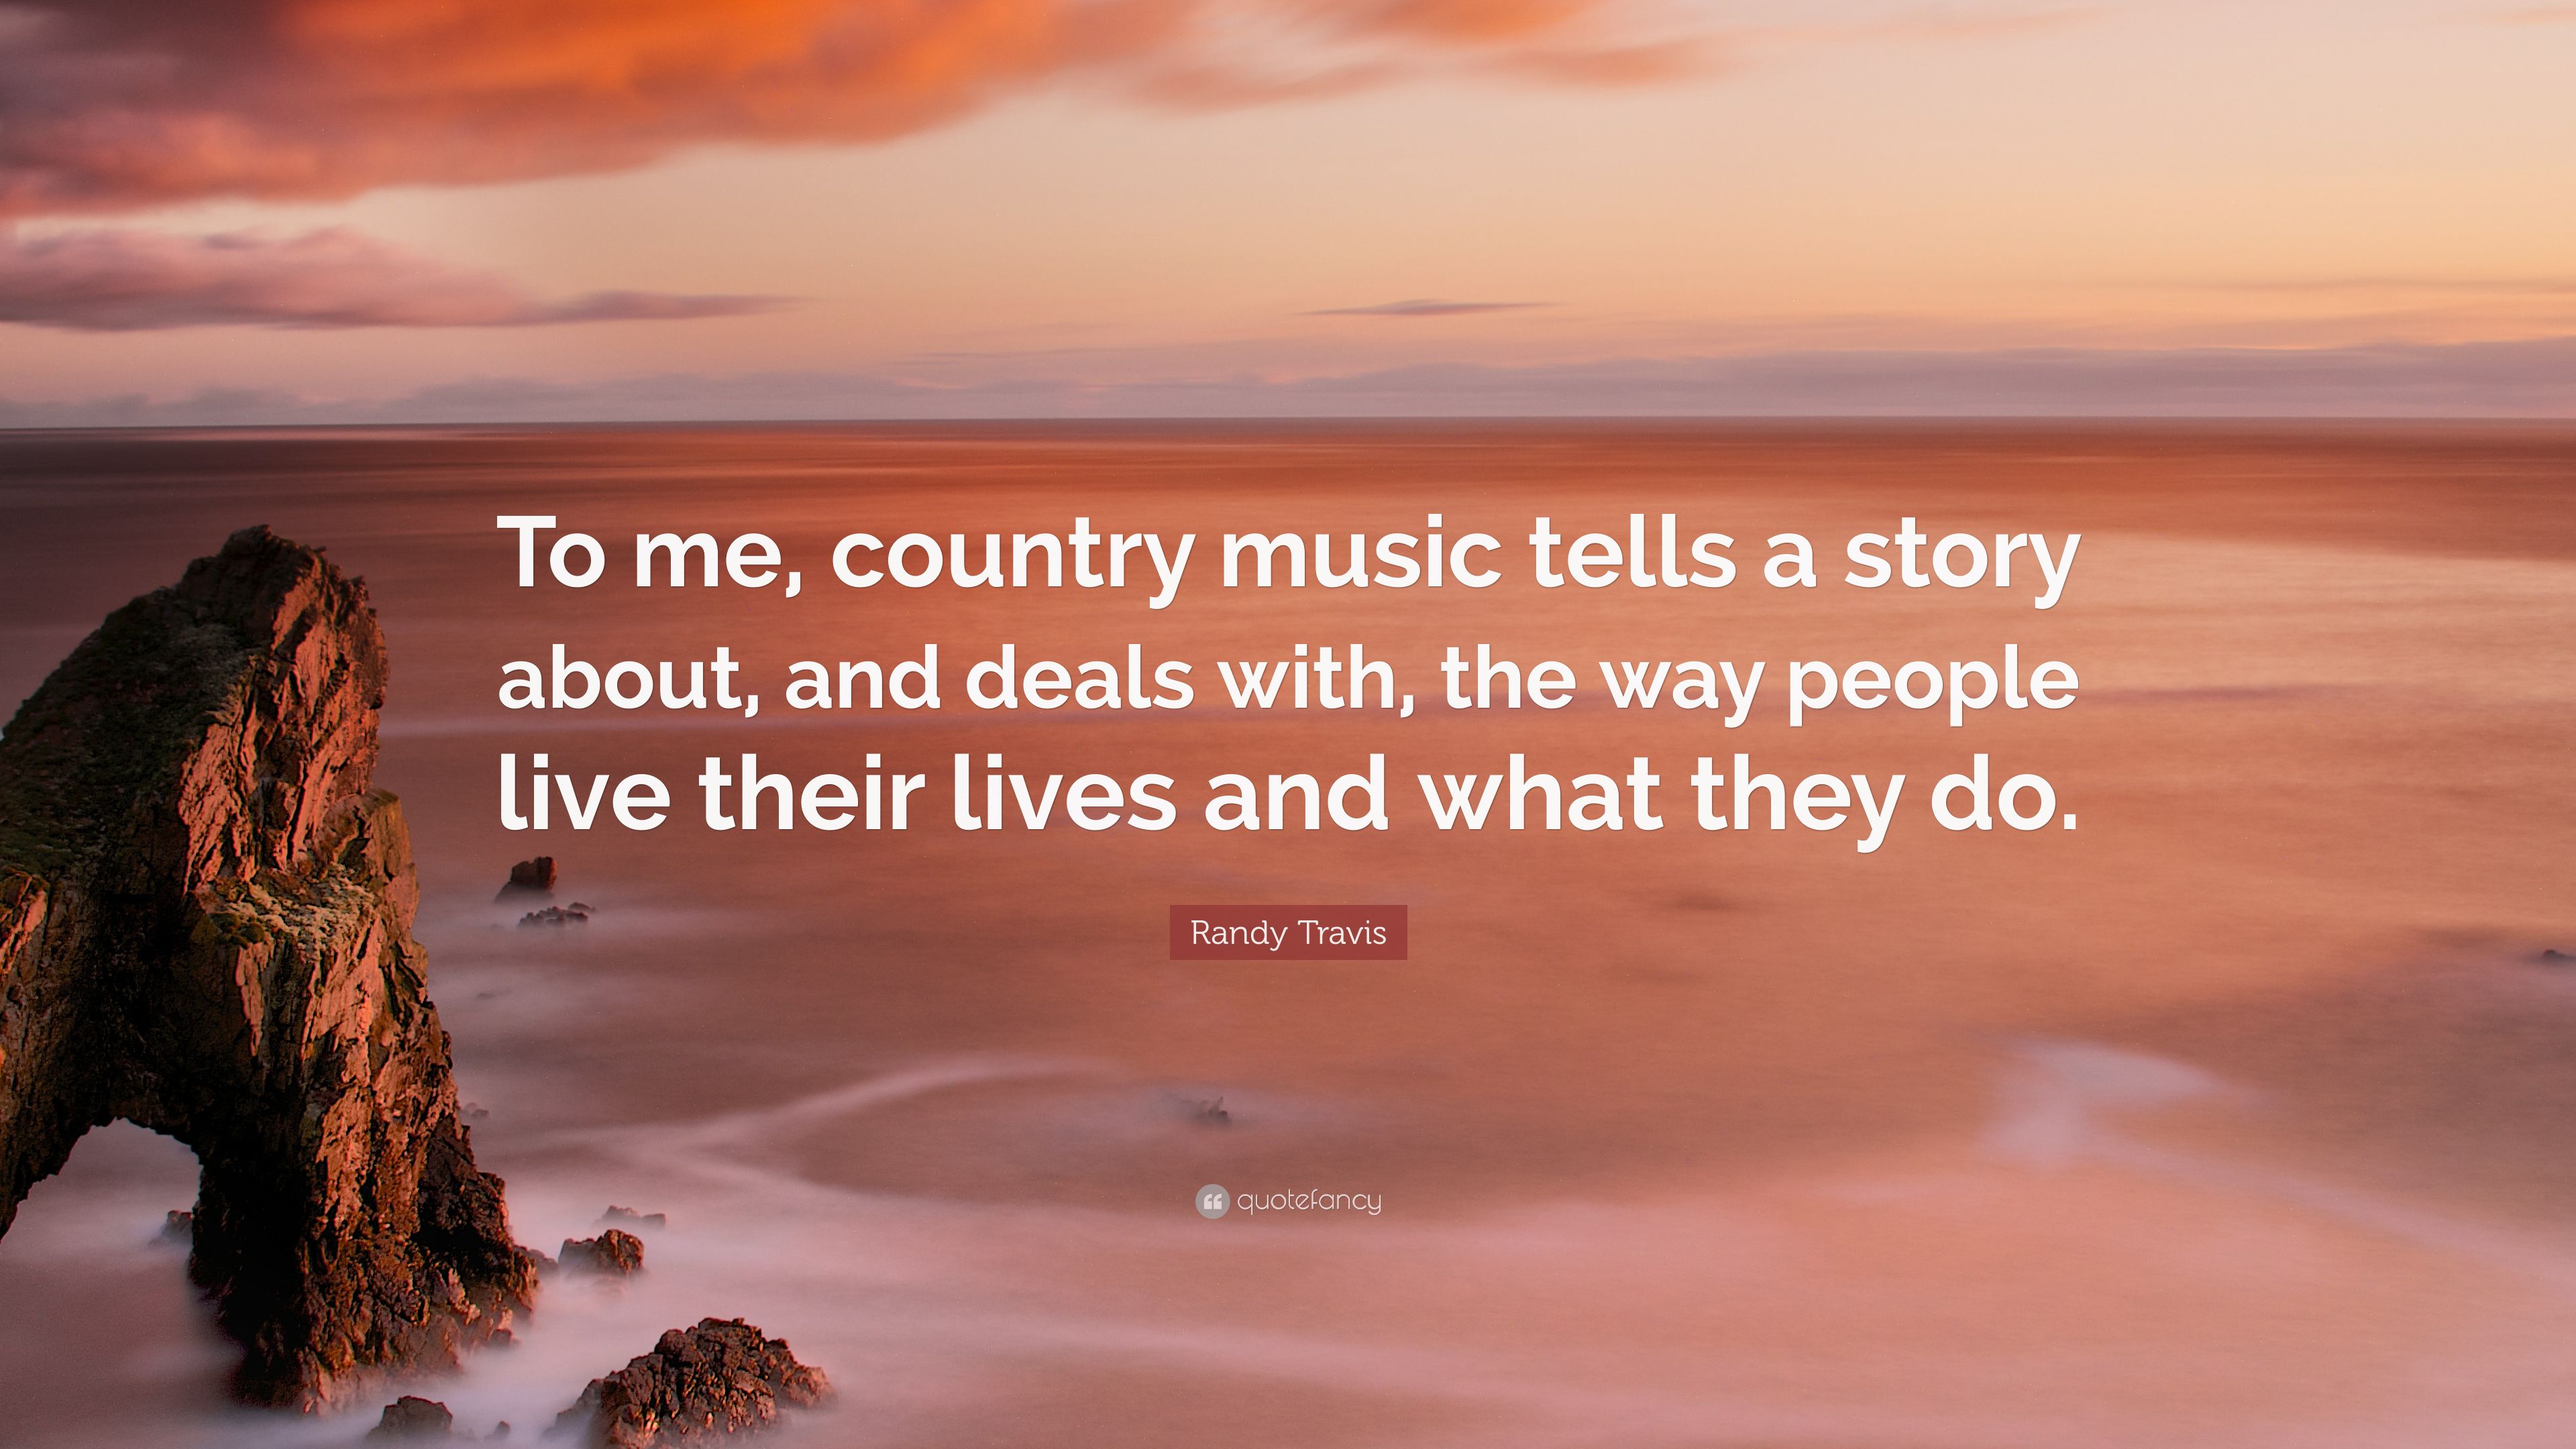 Randy Travis Quote: “To me, country music tells a story about, and deals with